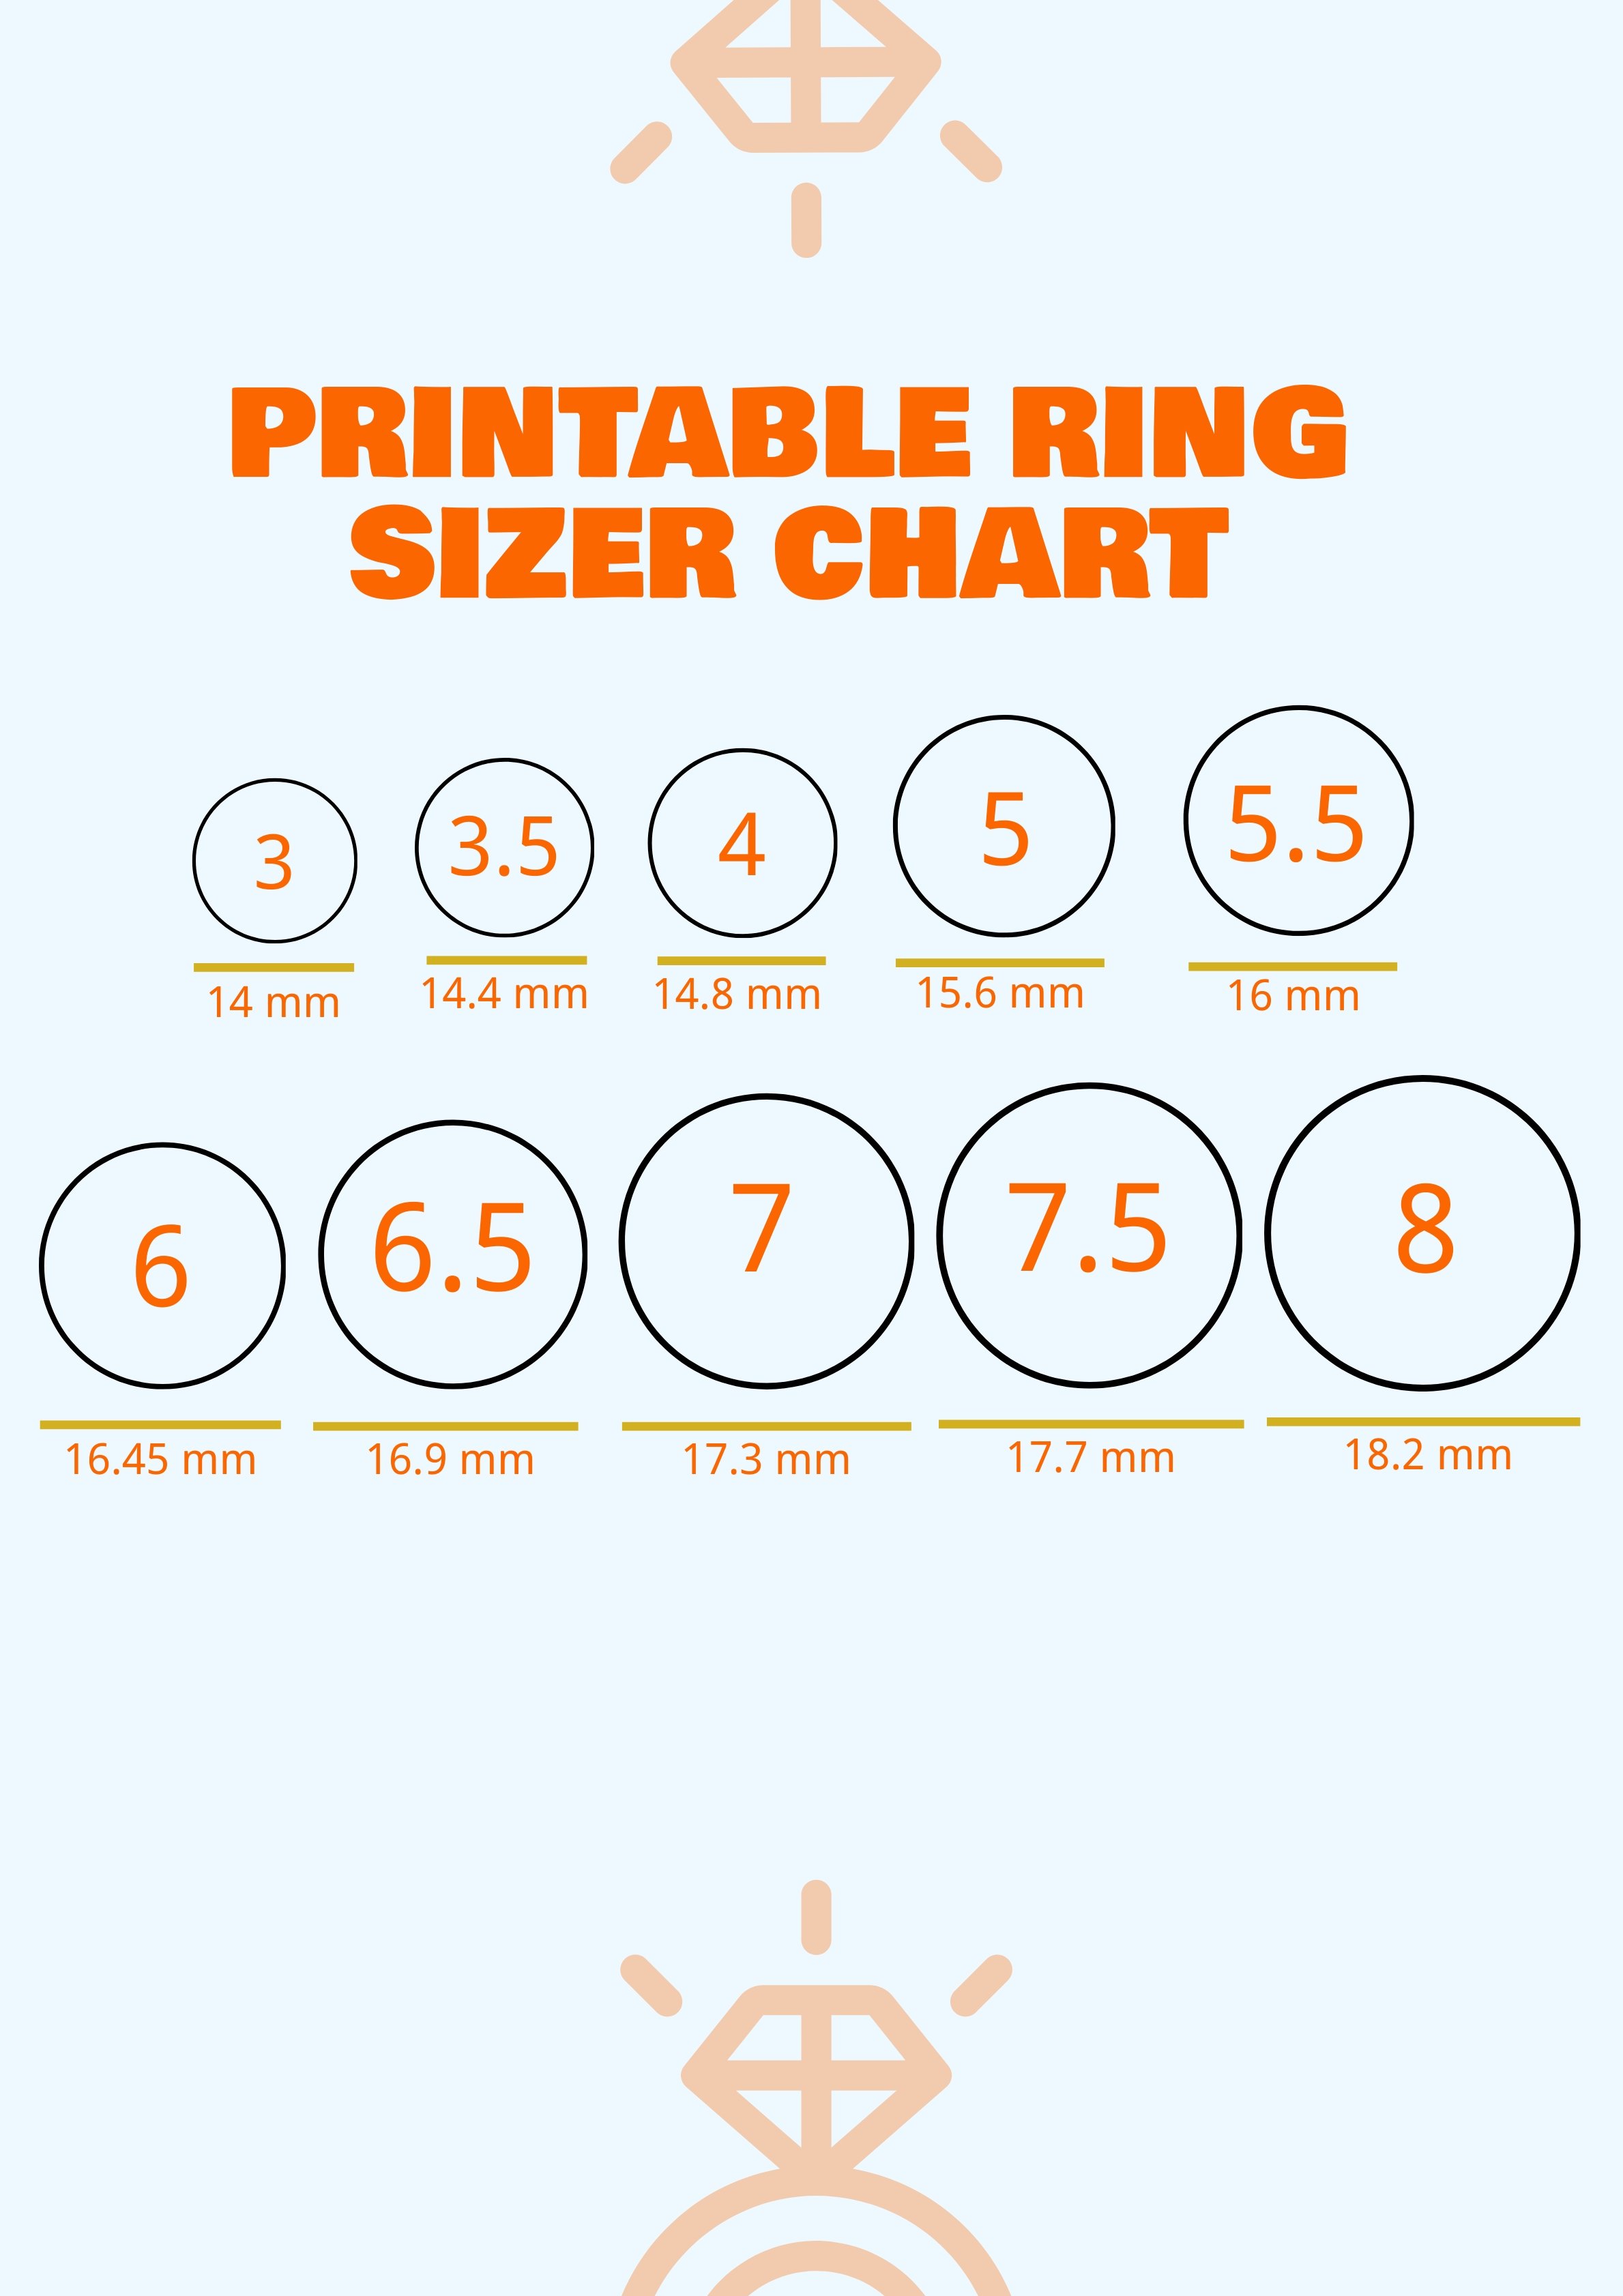 Free Personal Printable Ring Sizer Chart Template - Download in